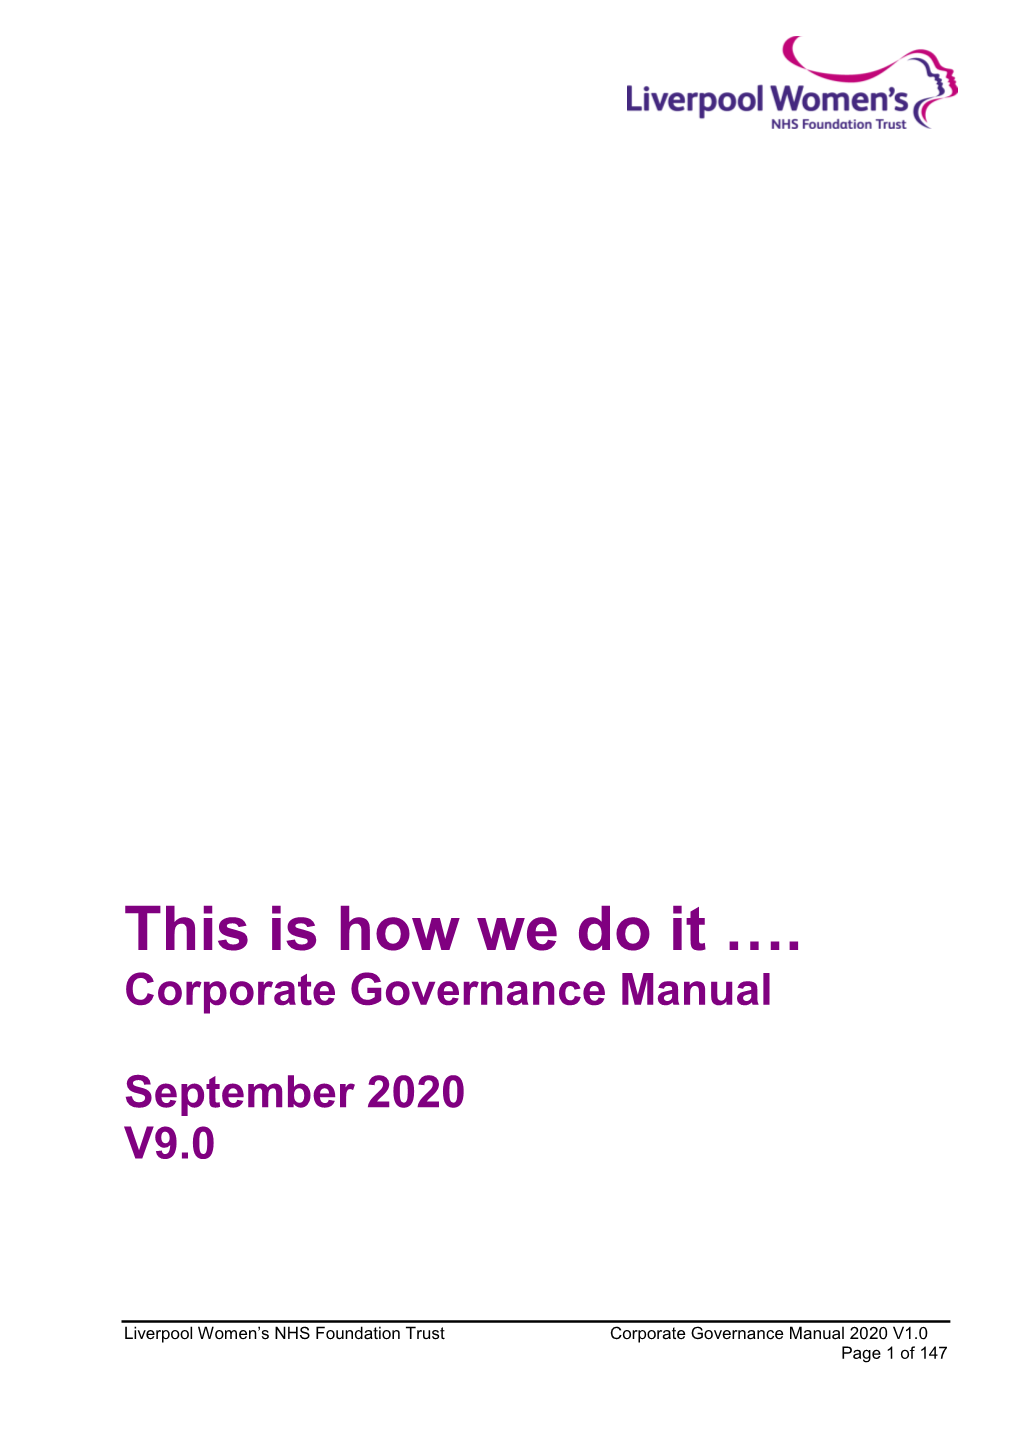 Corporate Governance Manual 2020 V1.0 Page 1 of 147